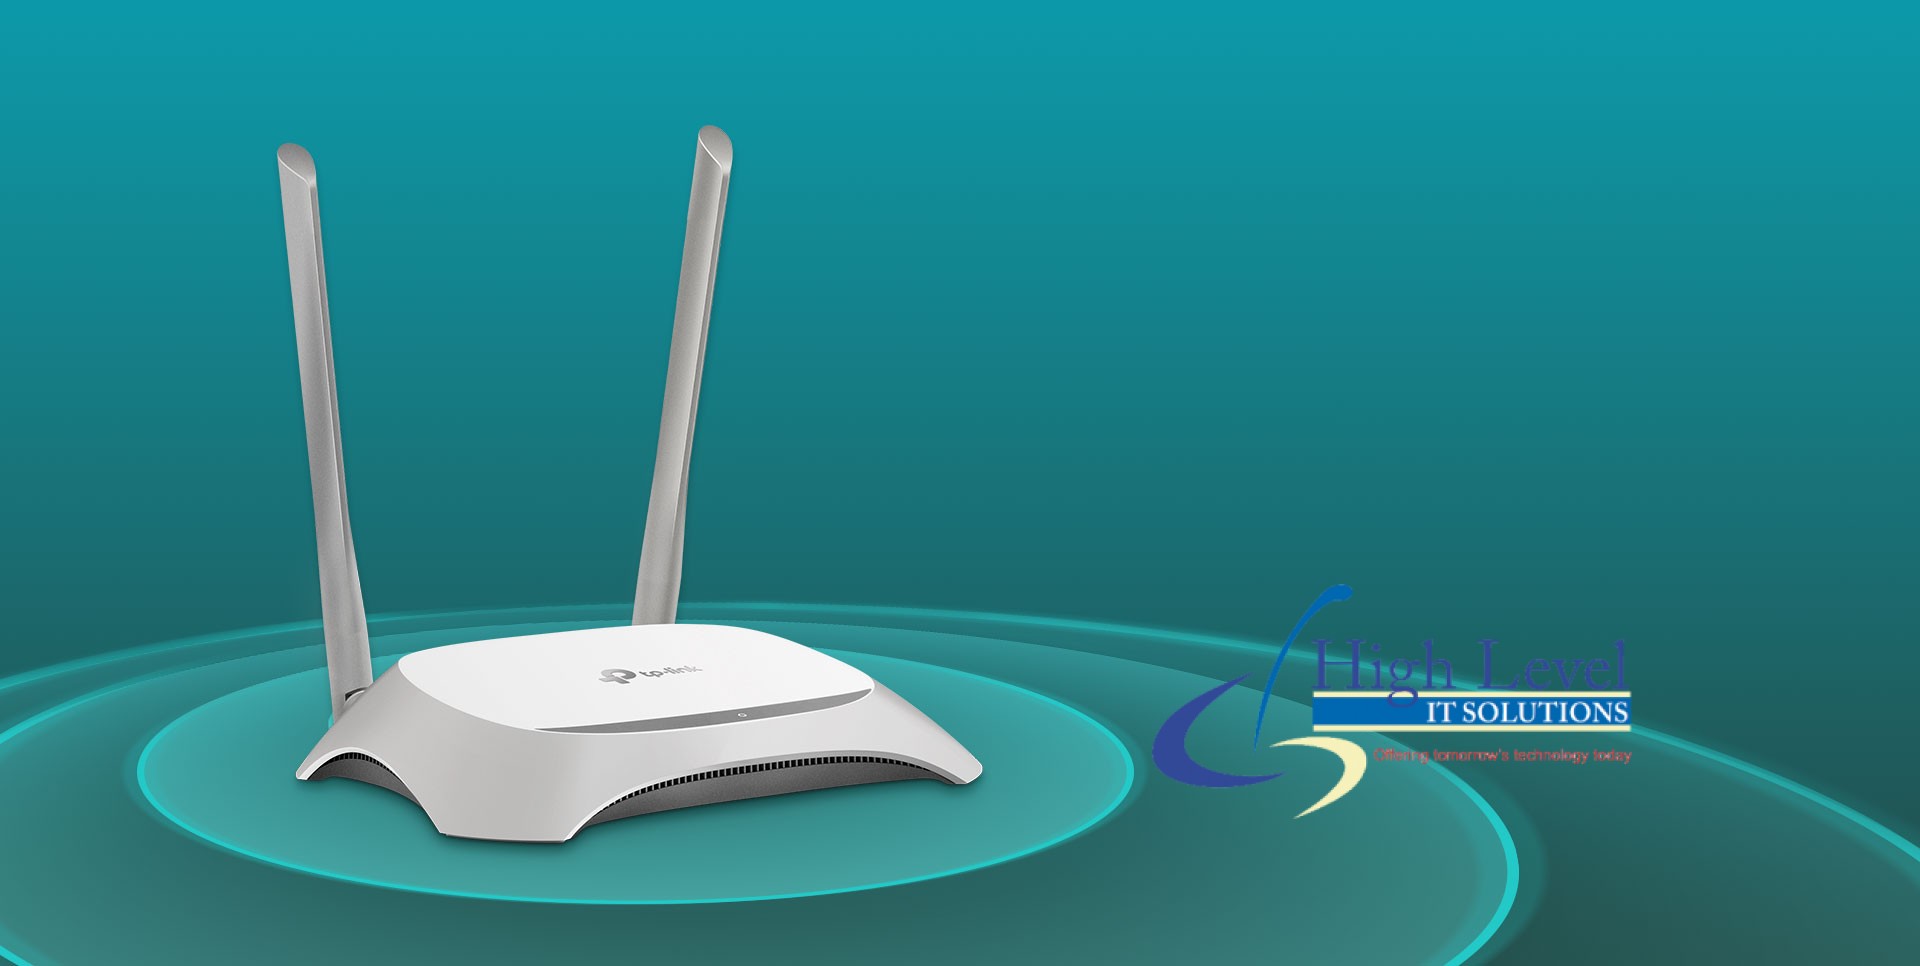 Tp-link Wifi Router